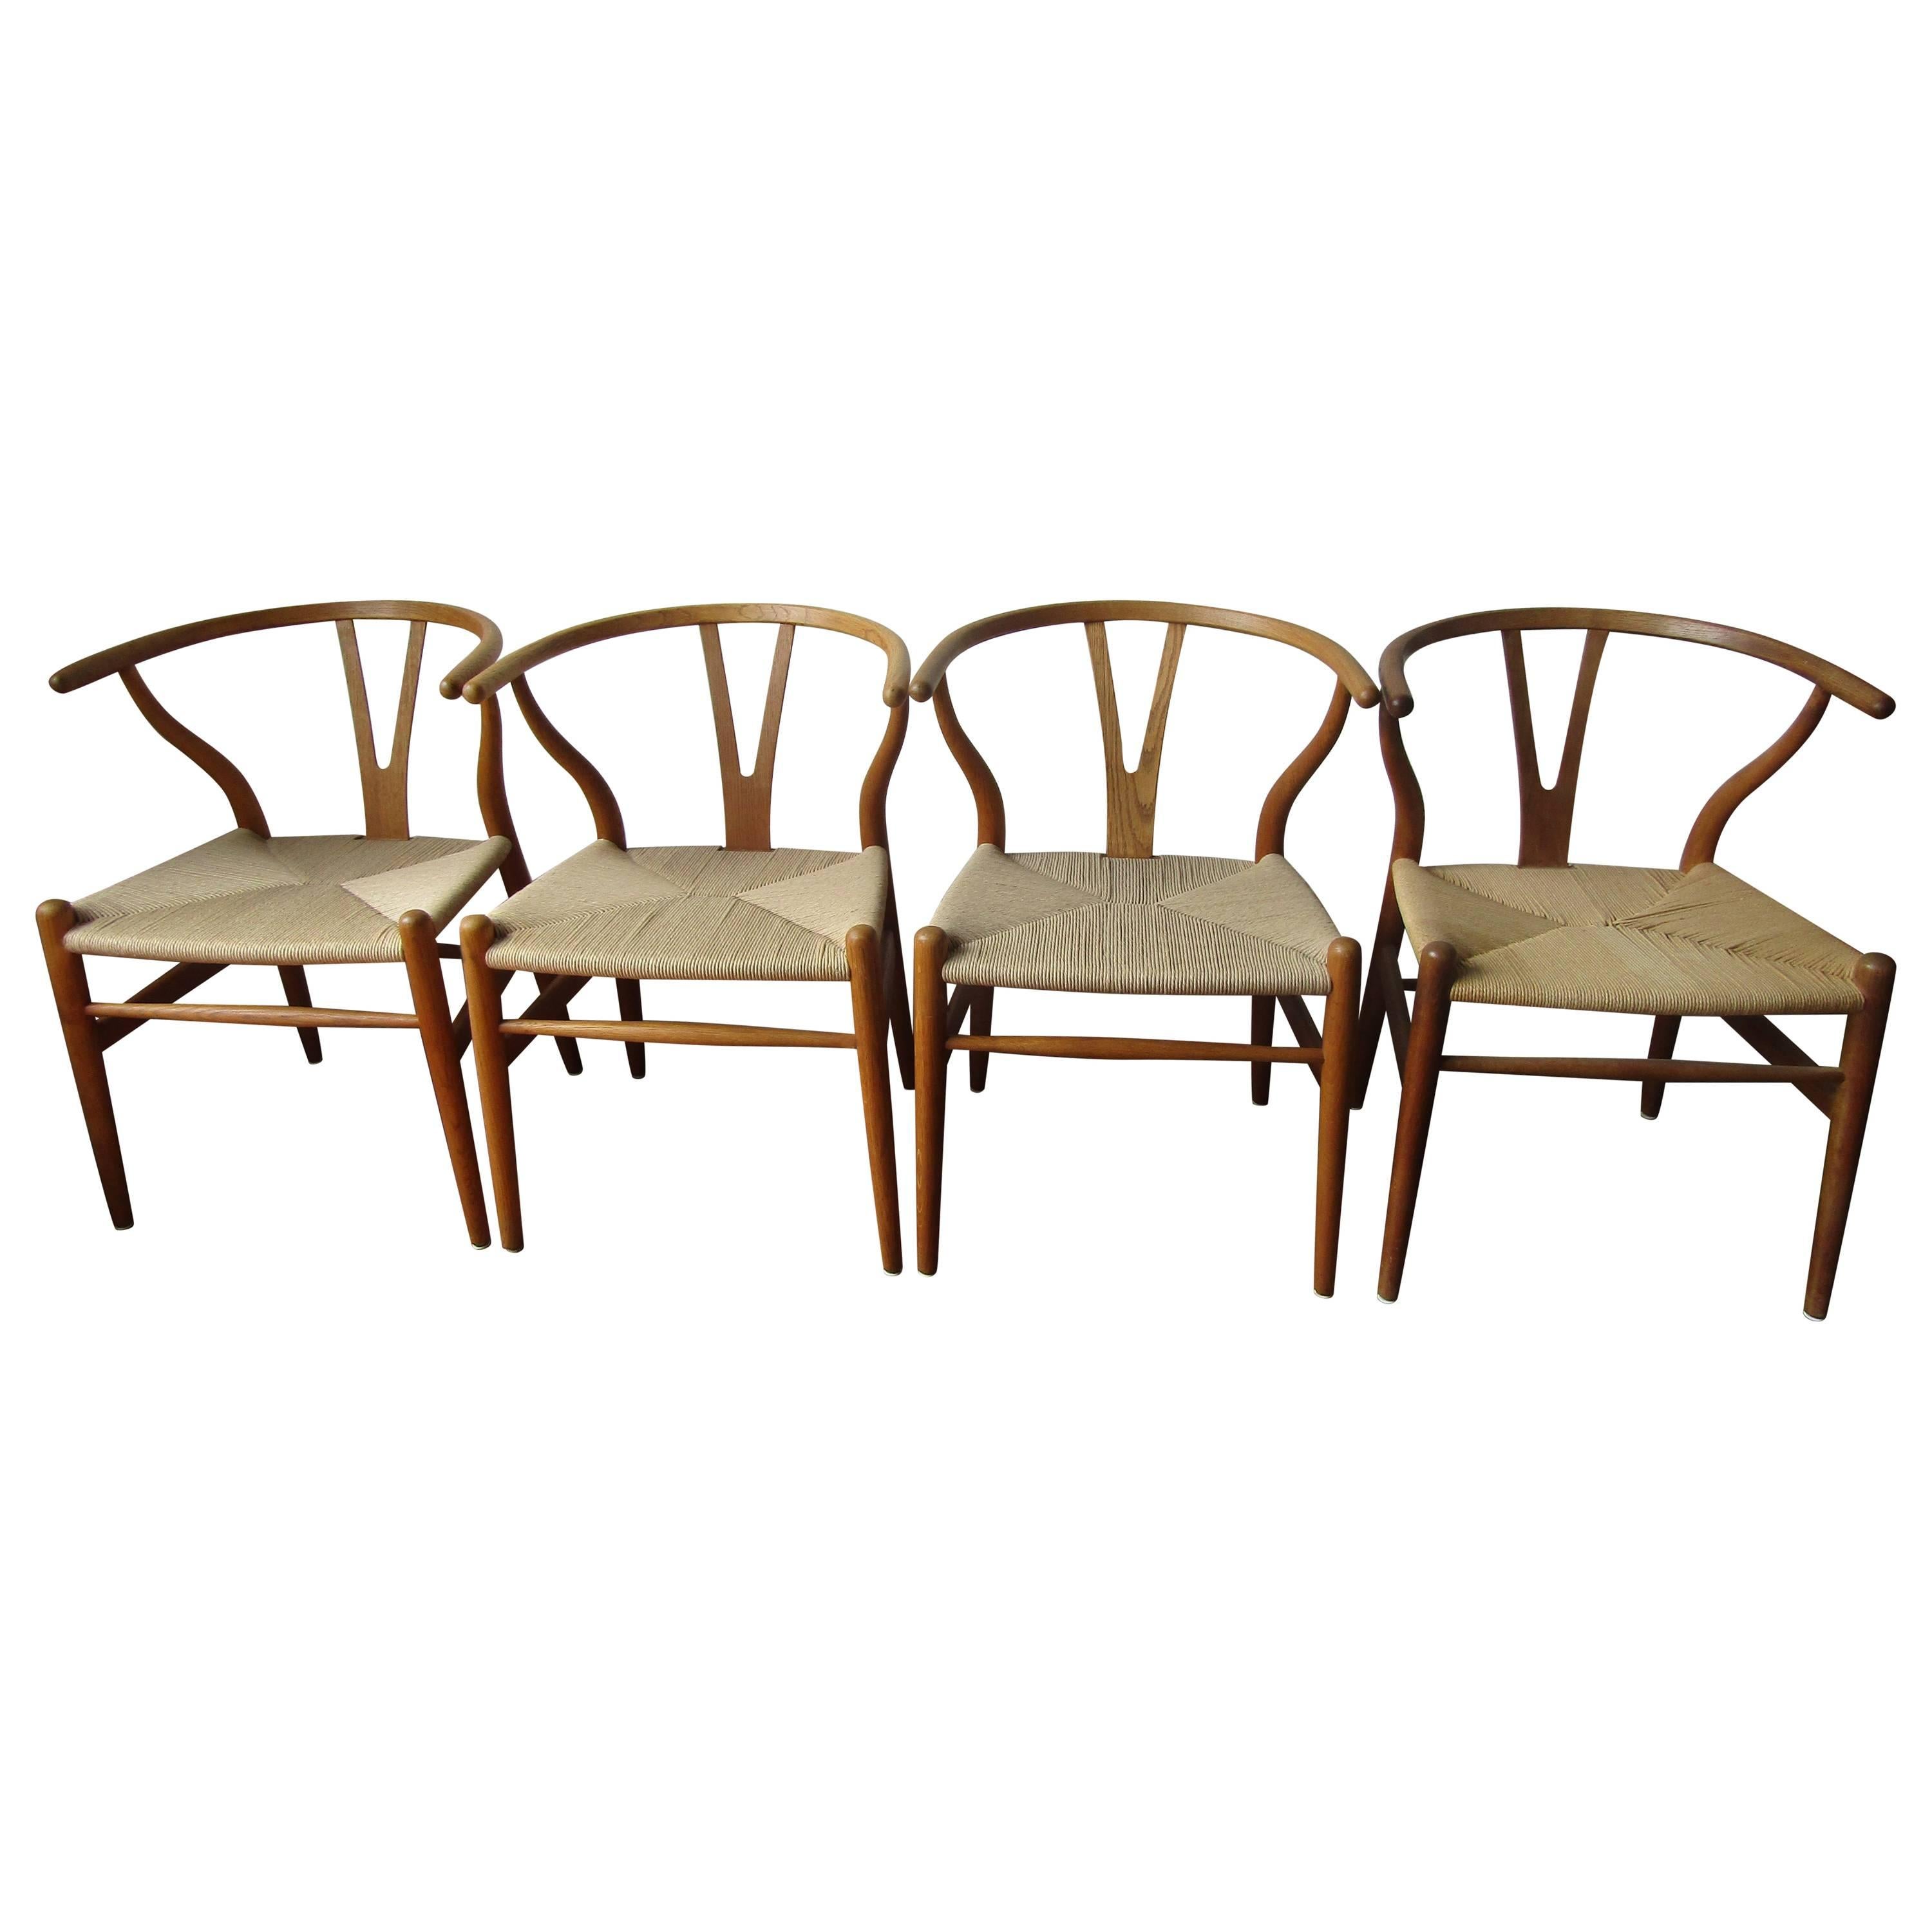 Set of Four Wishbone Chairs by Hans Wegner in White Oak and Papercord